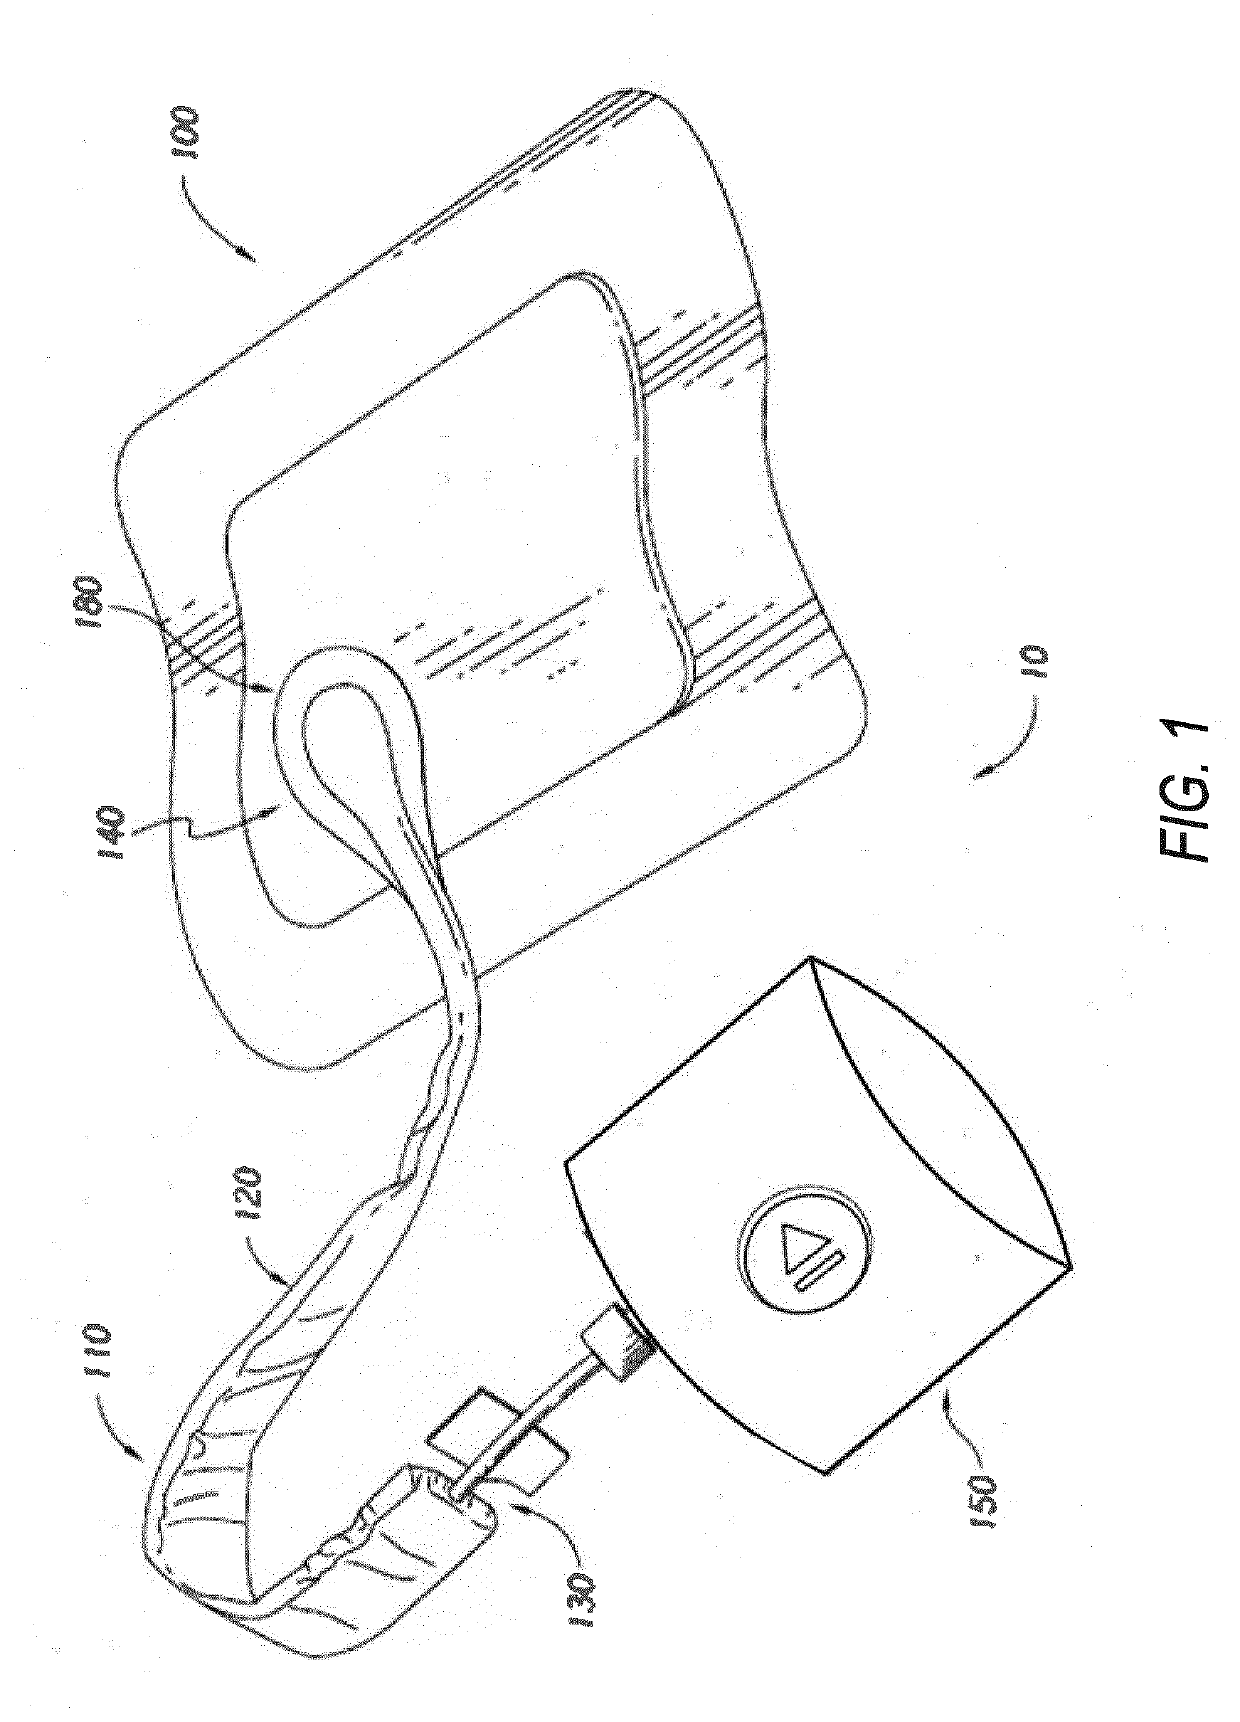 Wound therapy system and dressing for delivering oxygen to a wound